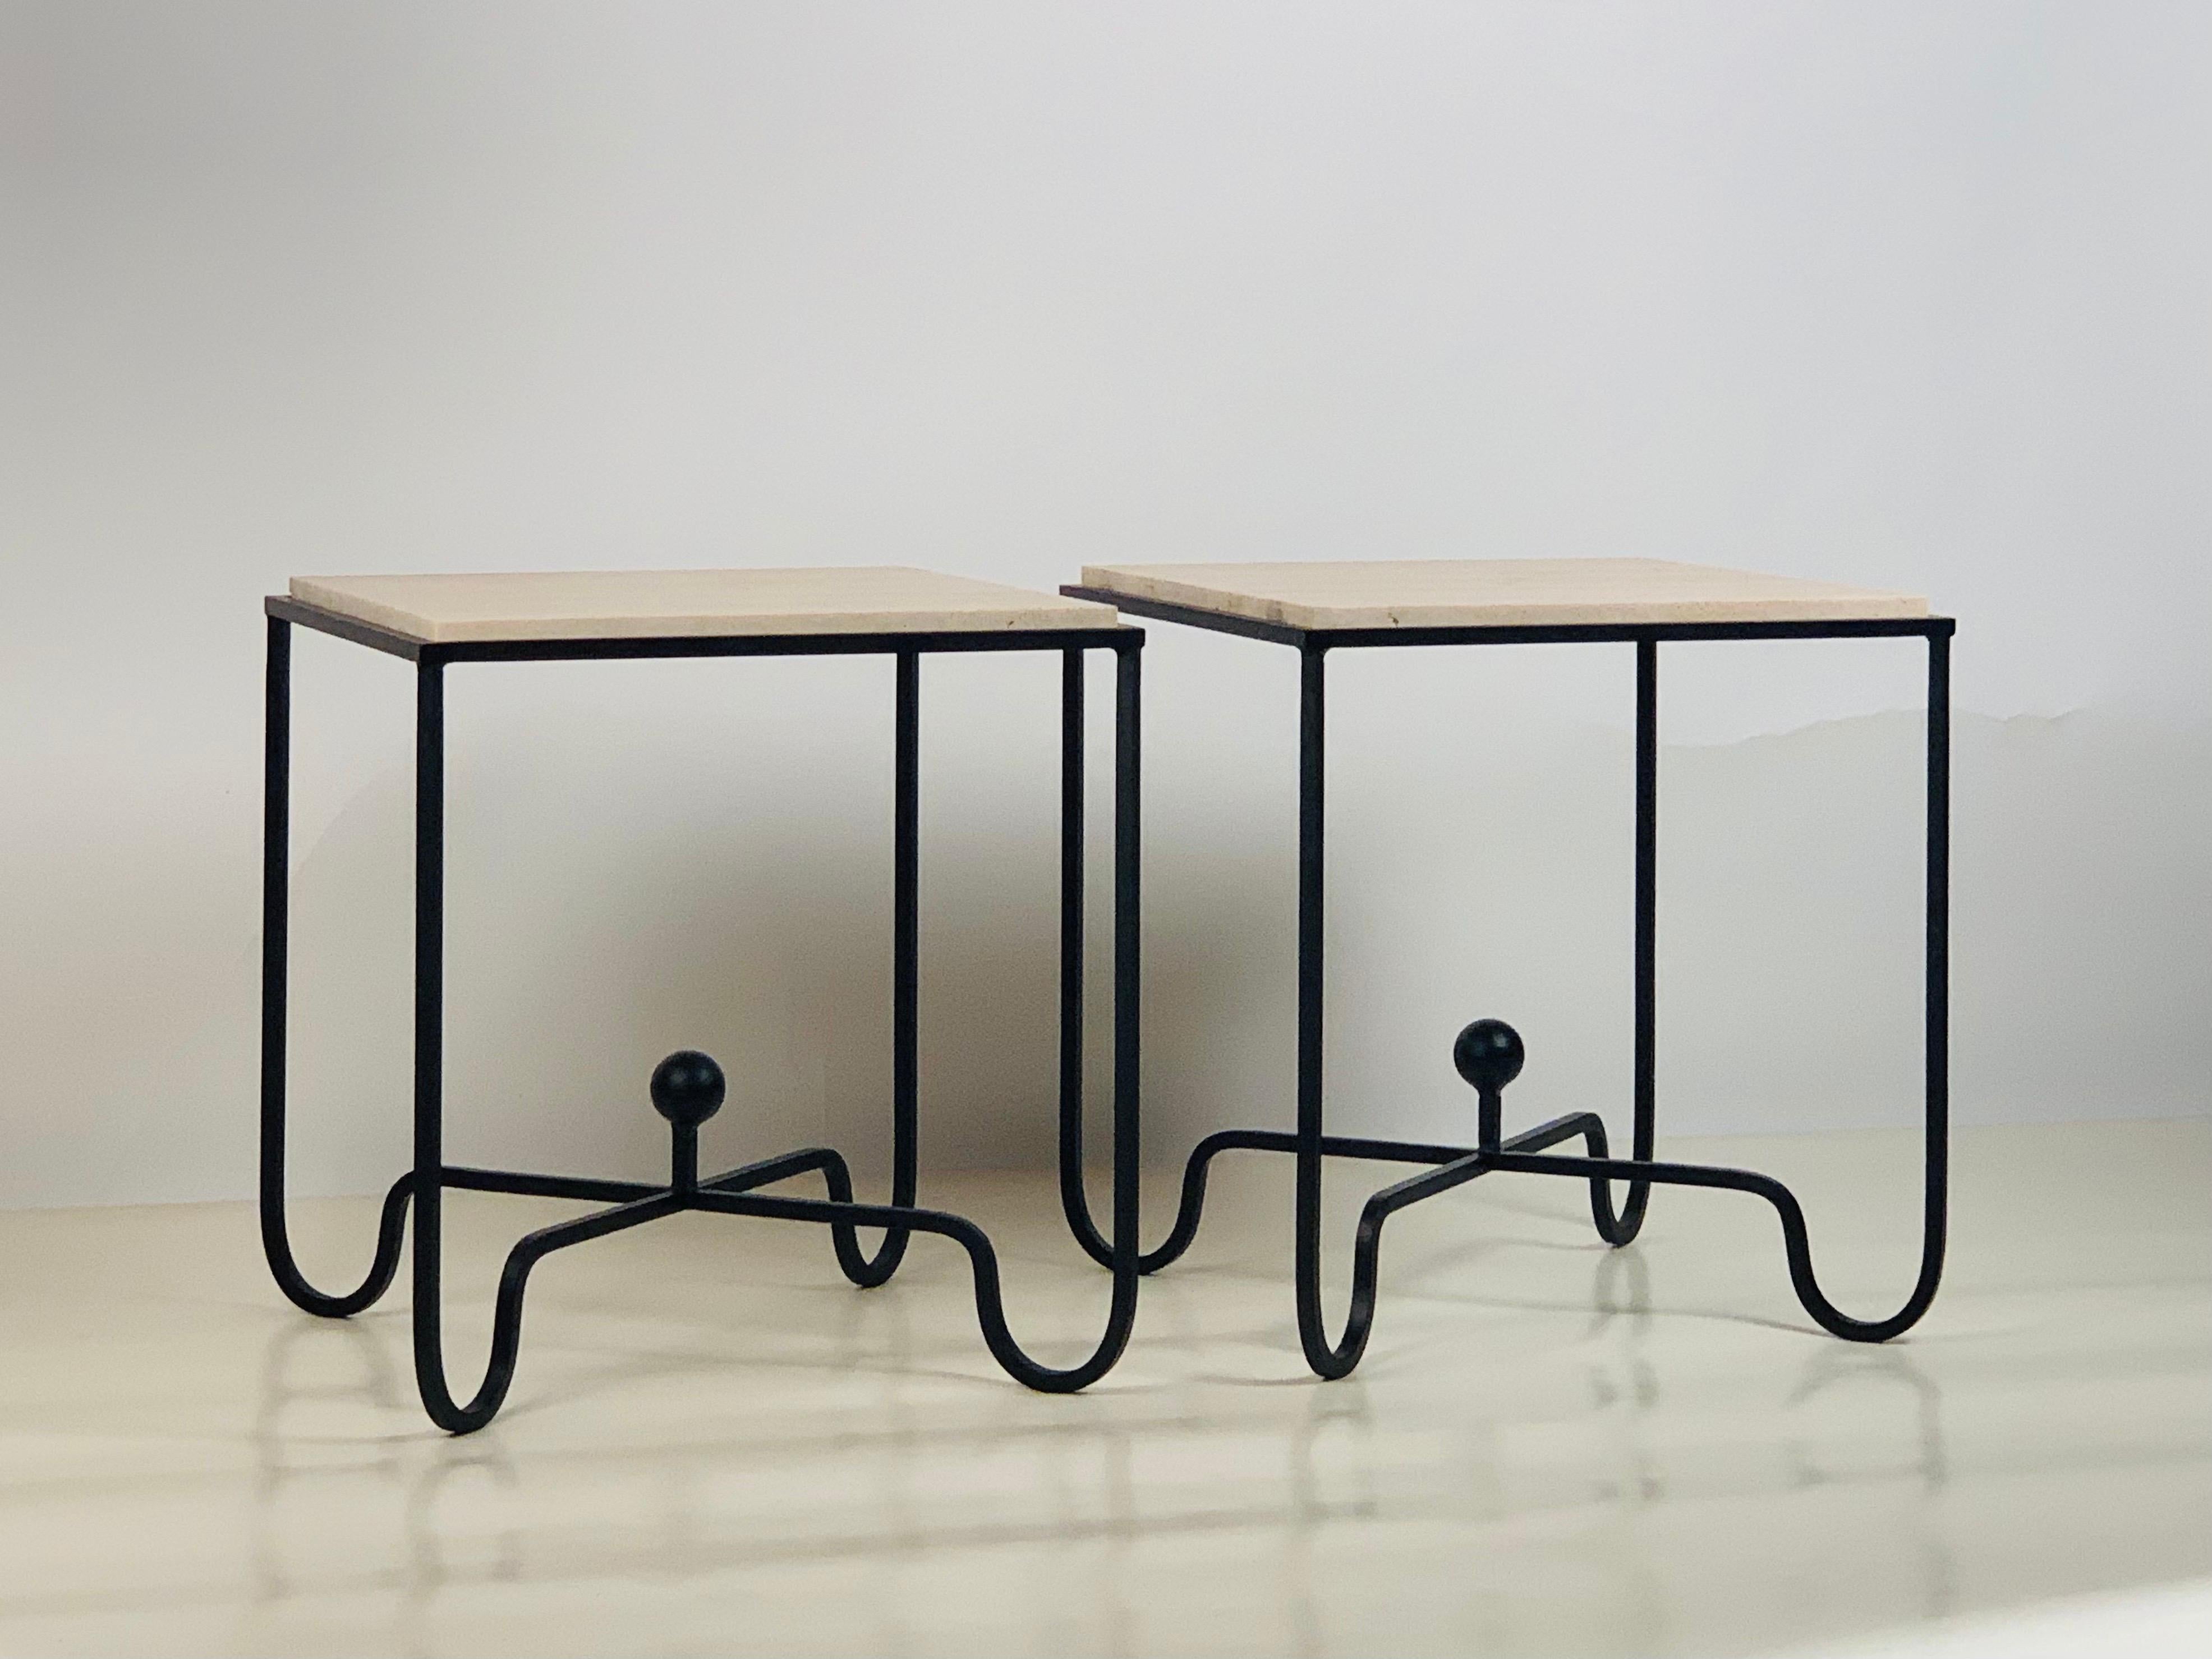 Pair of tall blackened iron and unfilled travertine 'Entretoise' side or end tables by Design Frères.

Also great when an understated pair of nightstands is desired.